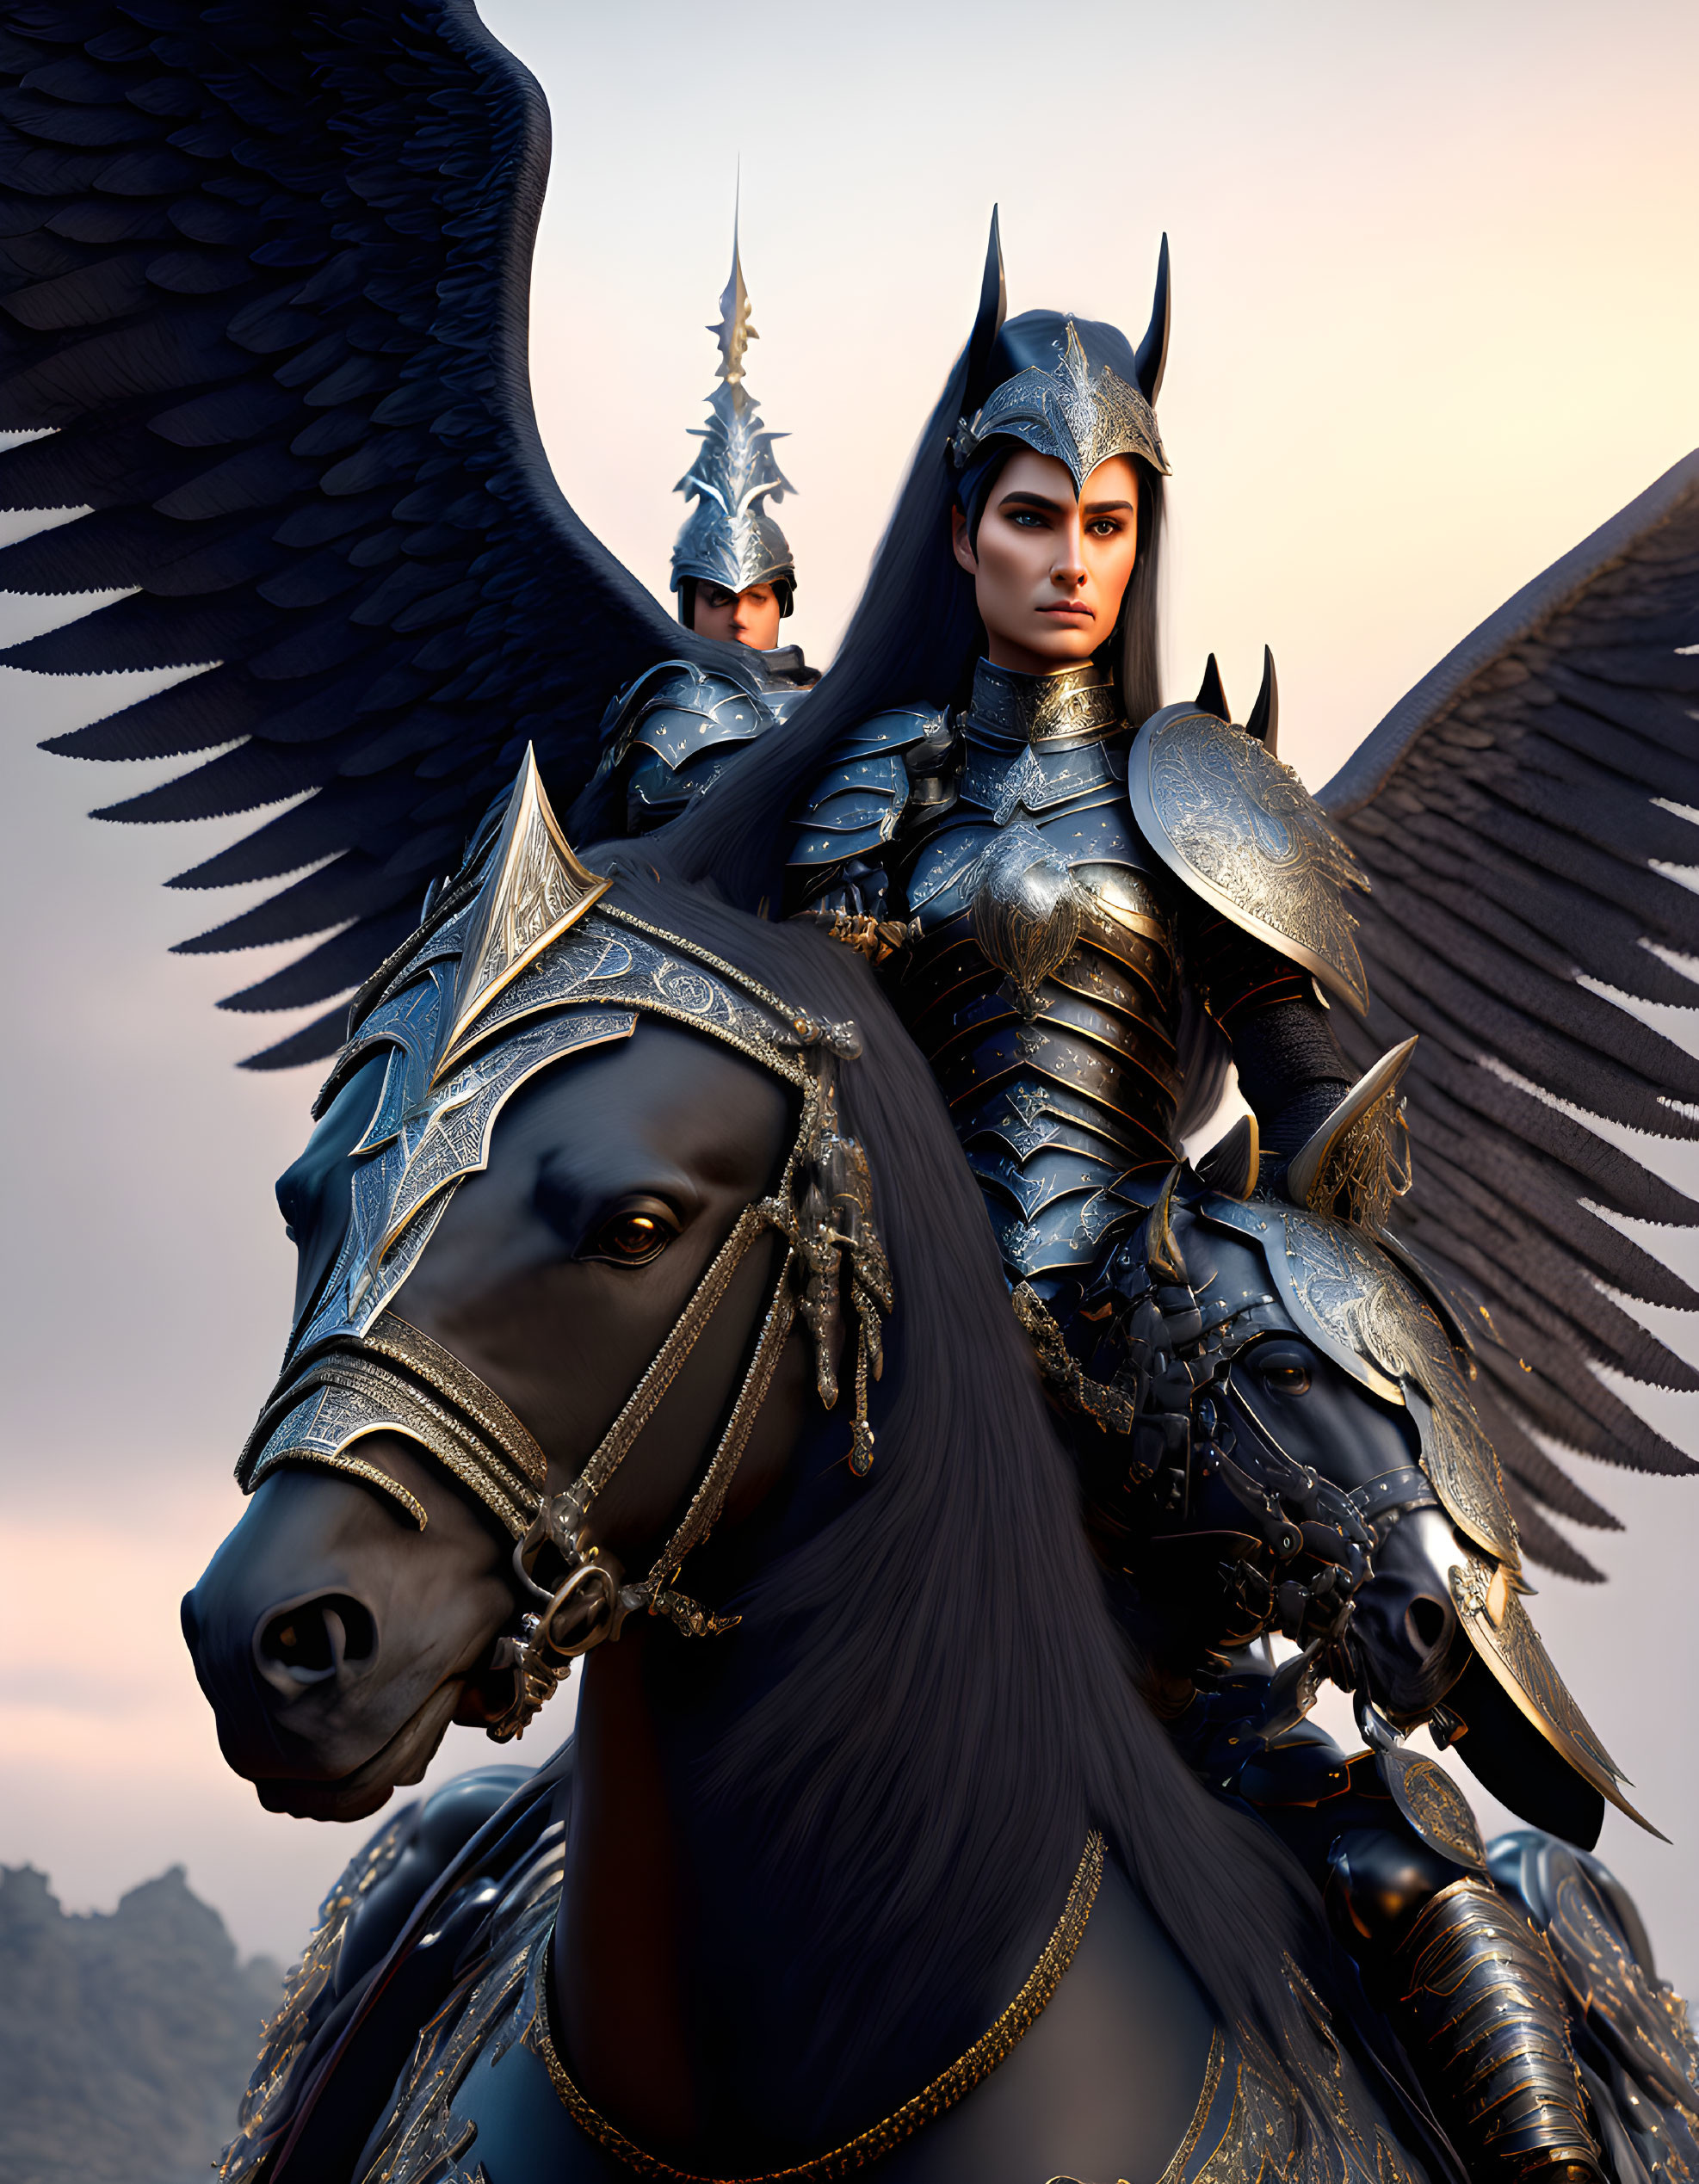 Fantasy armored warrior with wings riding horse in twilight sky